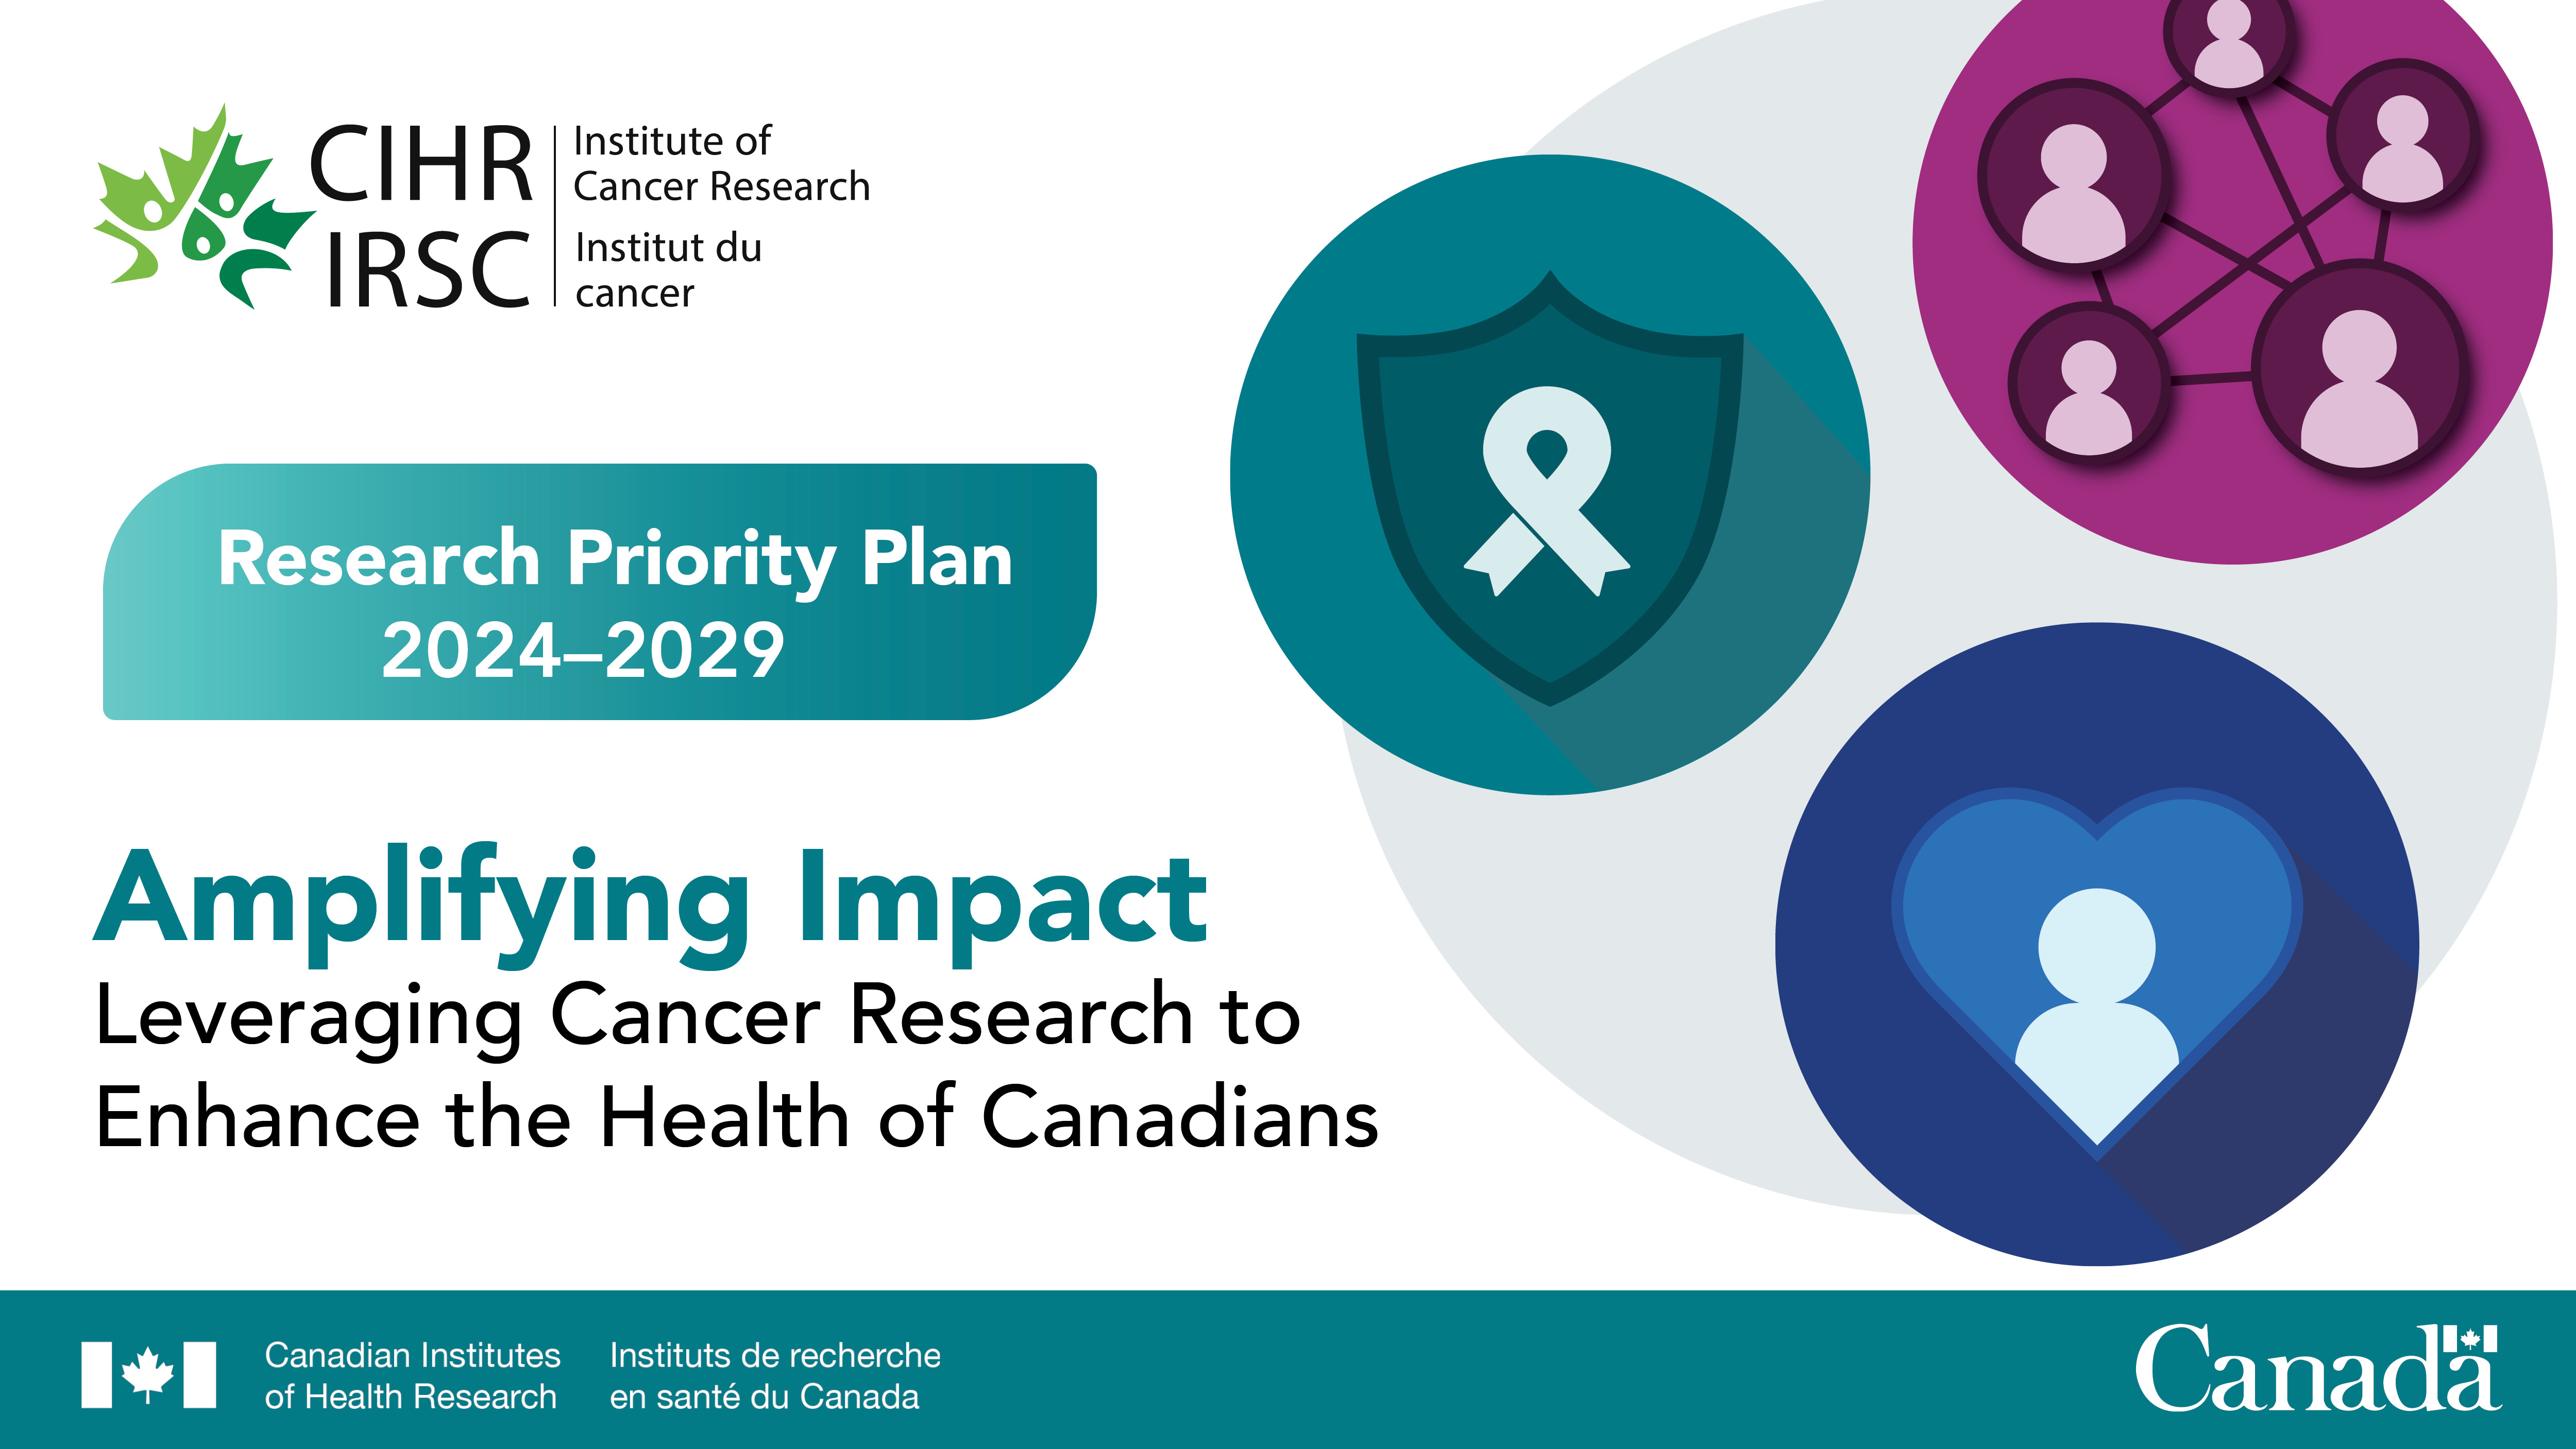 ICR Research Priority Plan 2024-2029